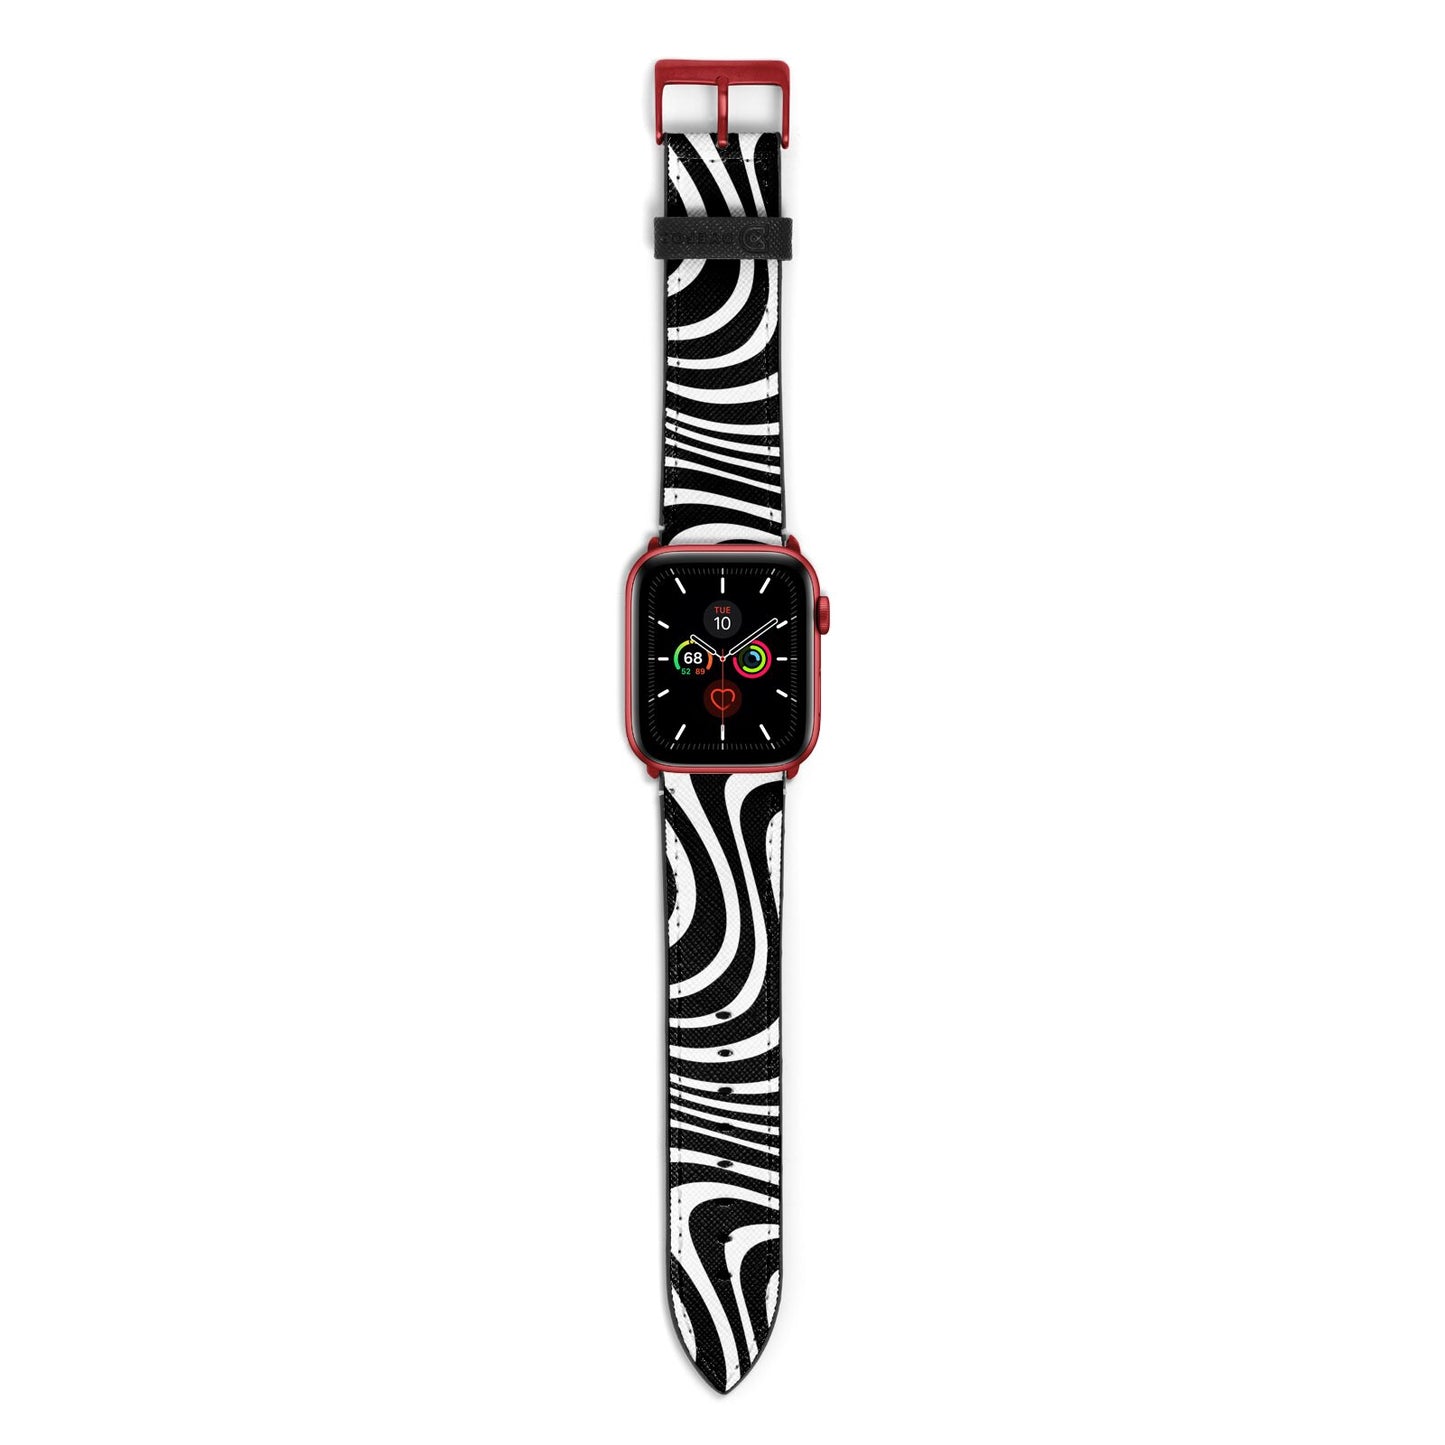 Black Wave Apple Watch Strap with Red Hardware